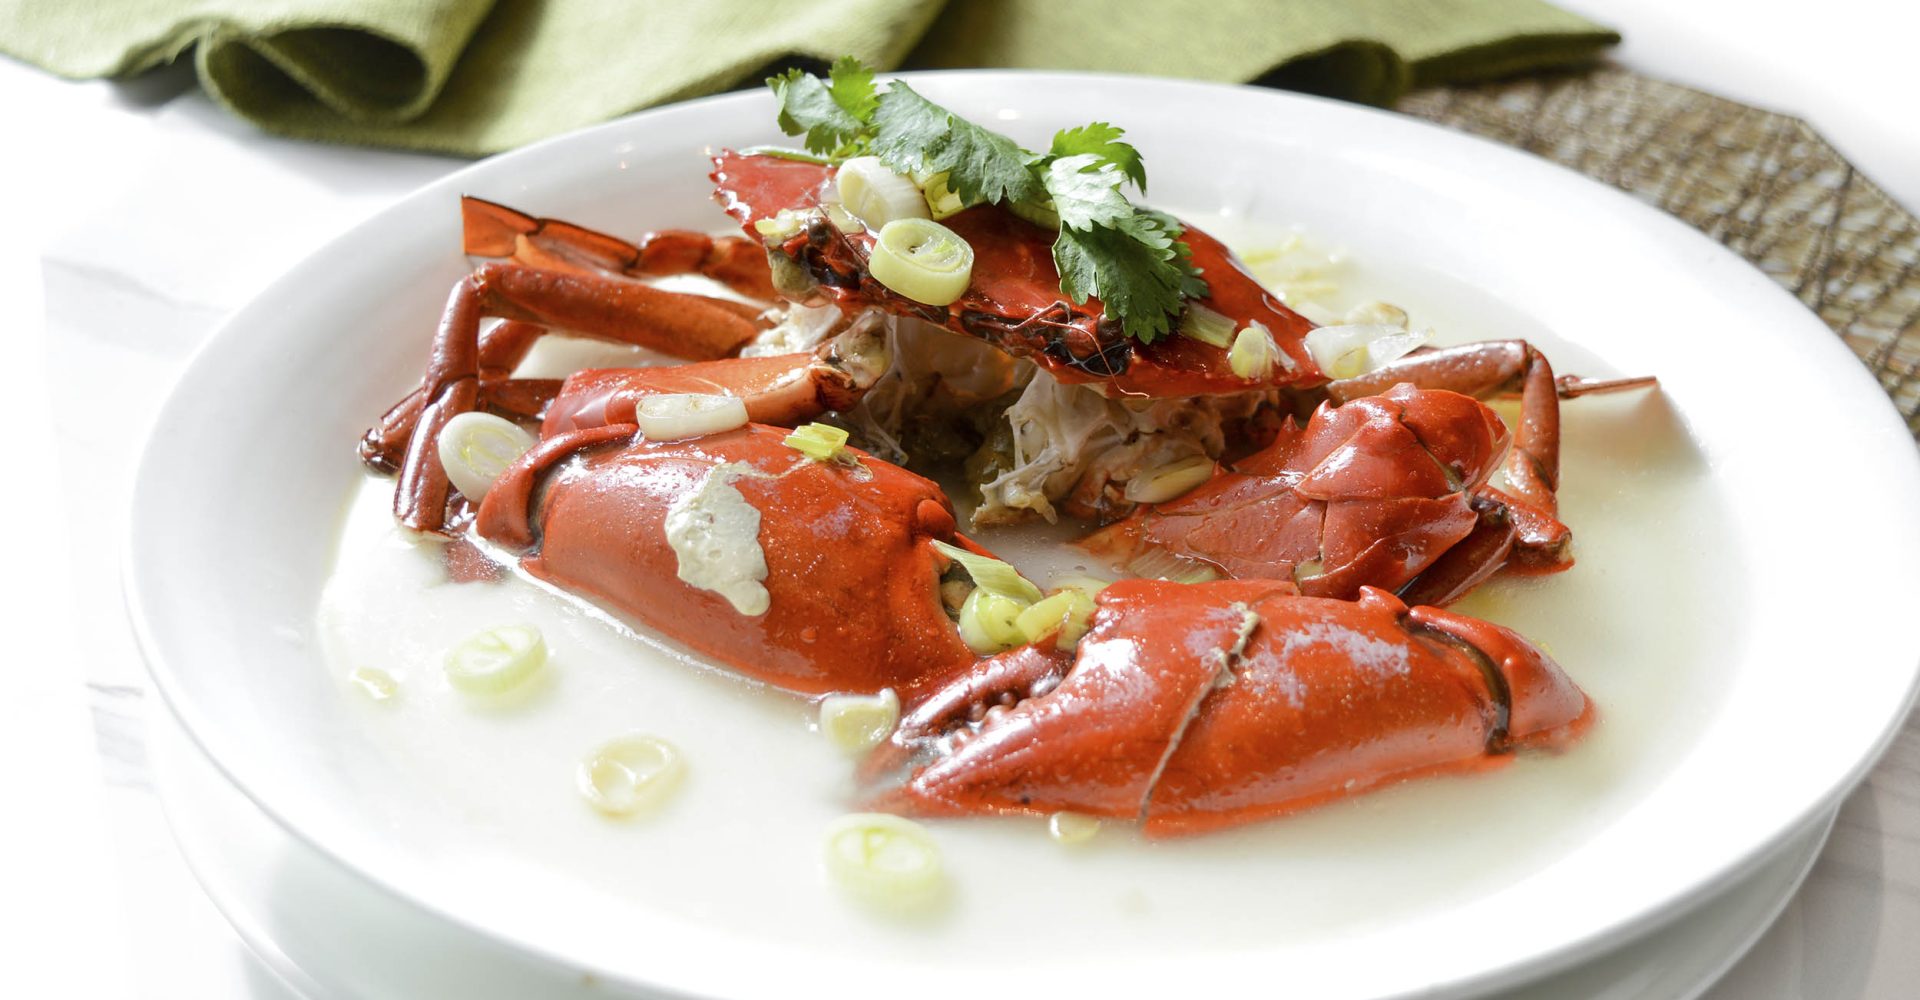 Xiu Live Seafood (crab) - Steamed crab with egg white